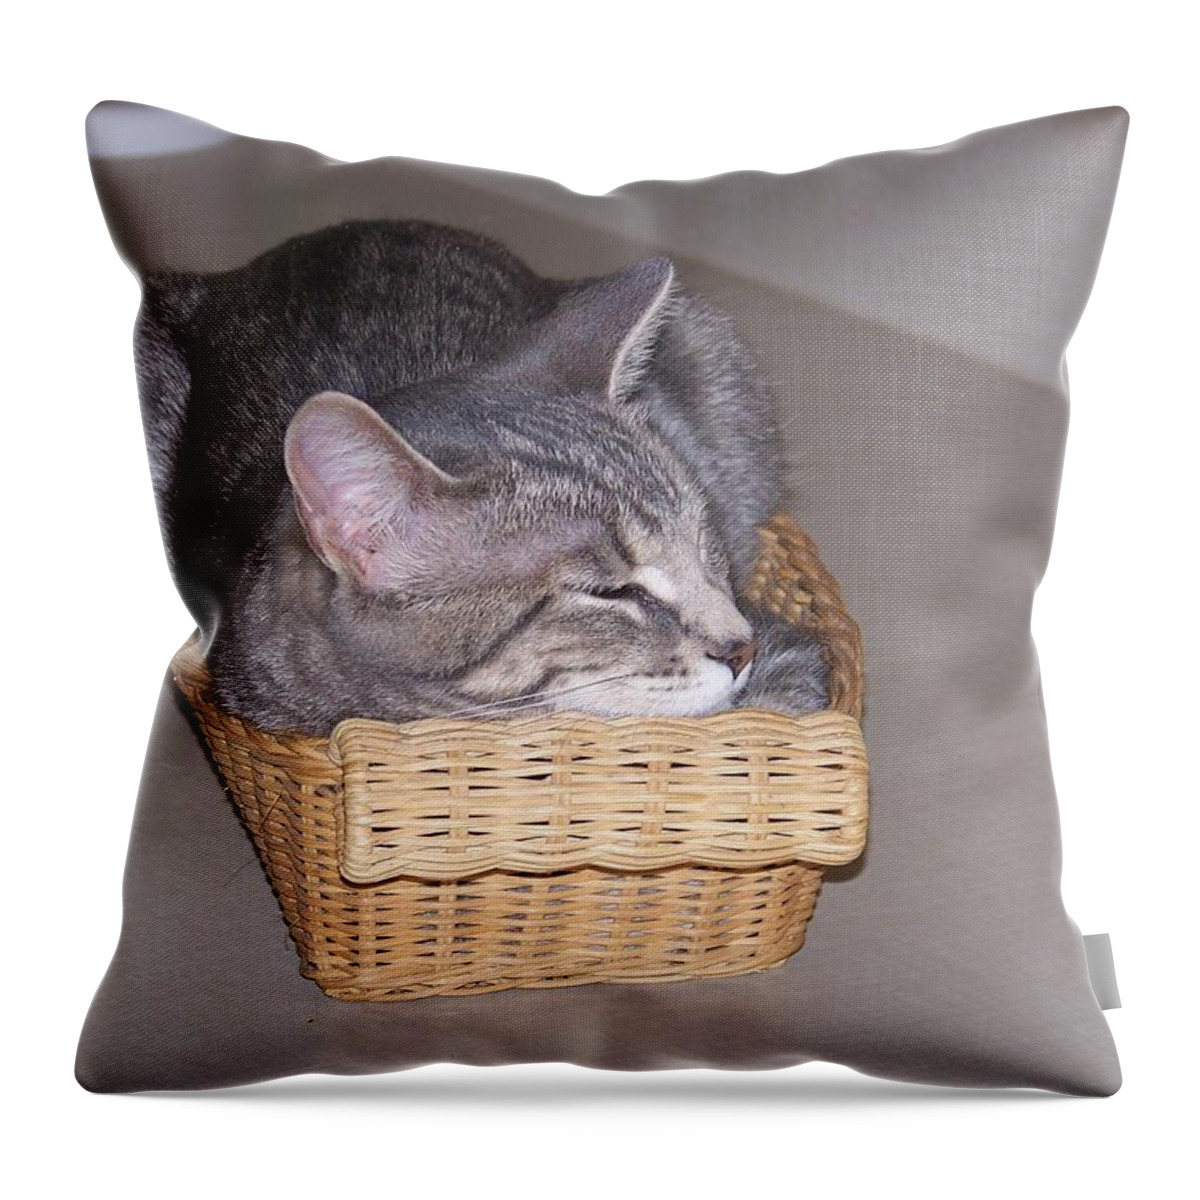 Cat Throw Pillow featuring the photograph Basket Time by Jackie Mueller-Jones